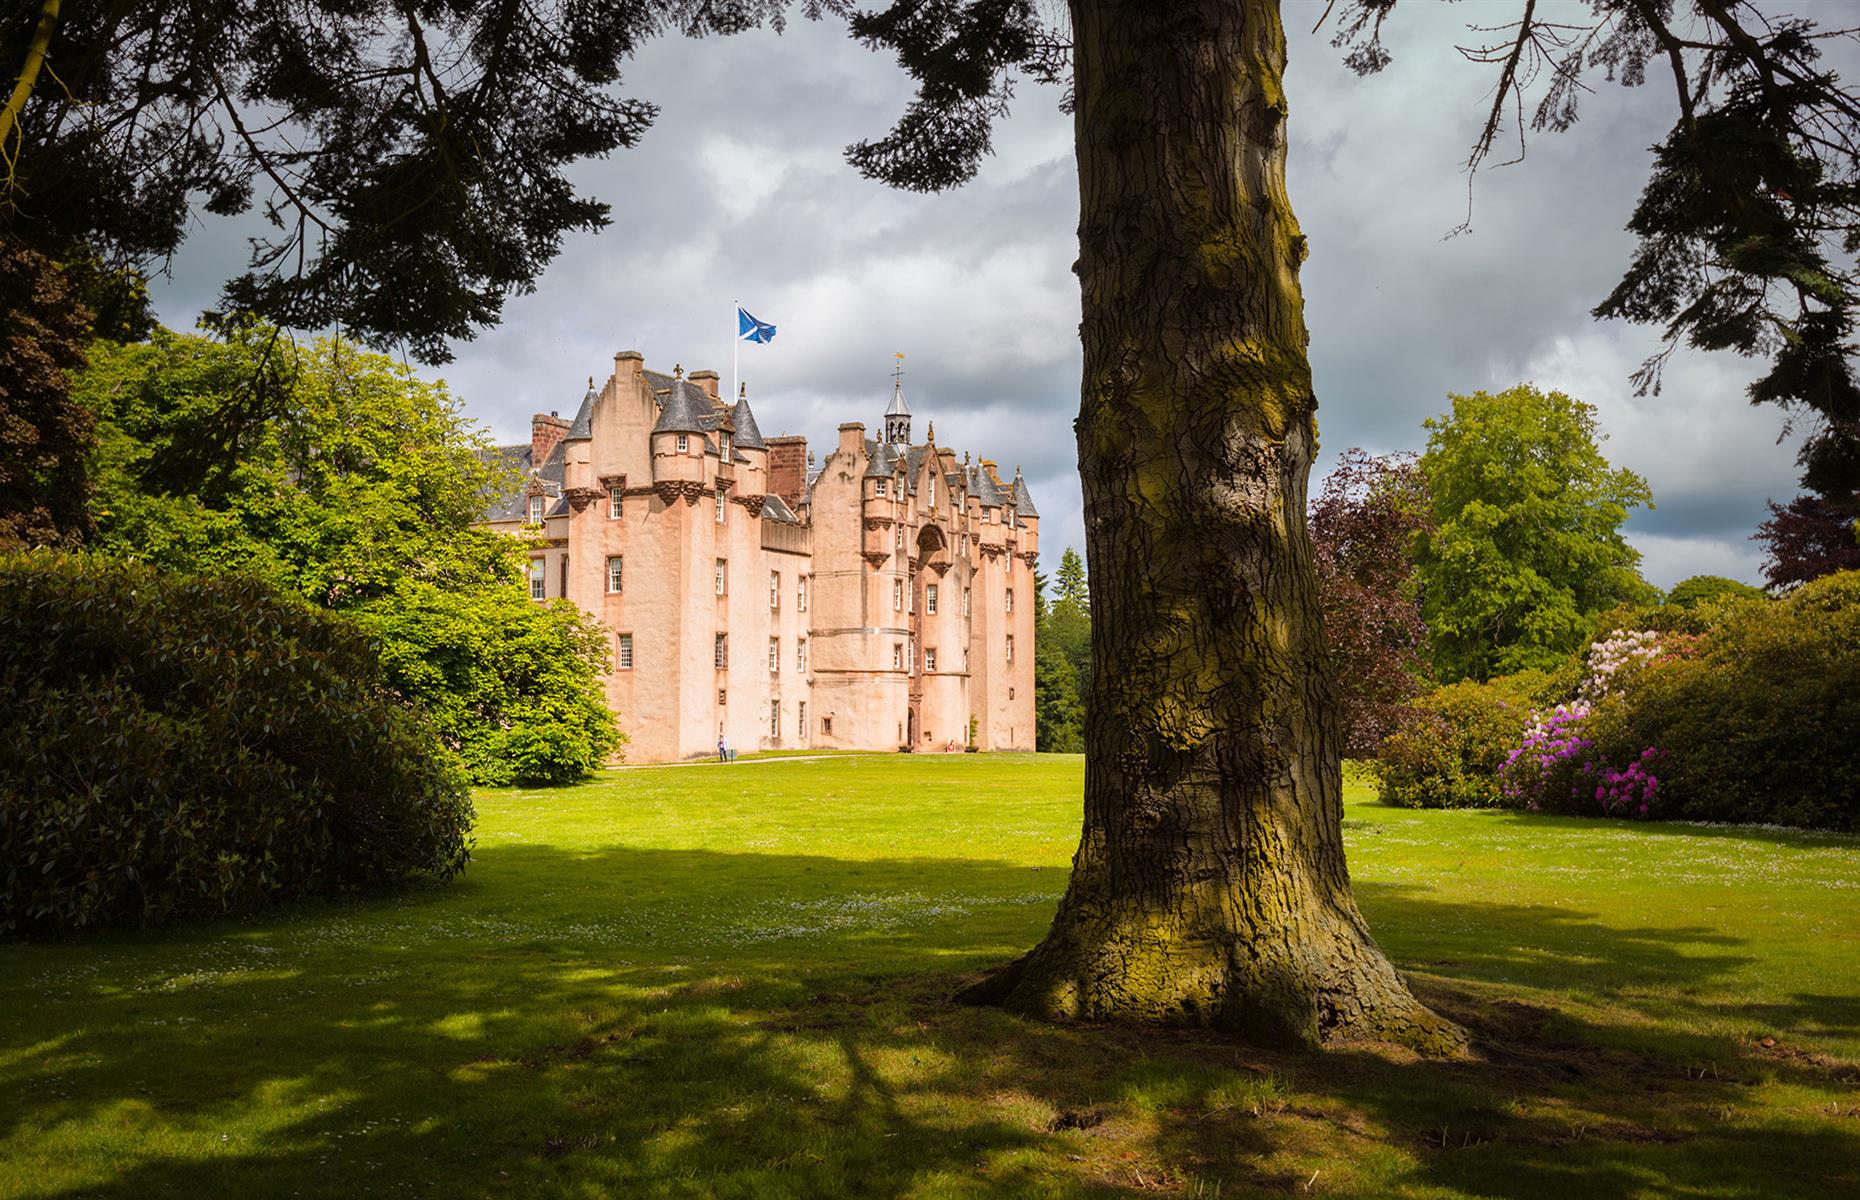 <p>Hidden away in the Aberdeenshire countryside, where castles are almost as common as people, this flushed pink fortress is a beautiful example of Scottish Baronial architecture. <a href="https://www.nts.org.uk/visit/places/fyvie-castle">Fyvie</a> comes with five towers and numerous turrets, where you can almost imagine Rapunzel hidden away waiting for her prince, but if she's as unlucky as one former resident, her rescue won't be forthcoming.</p>